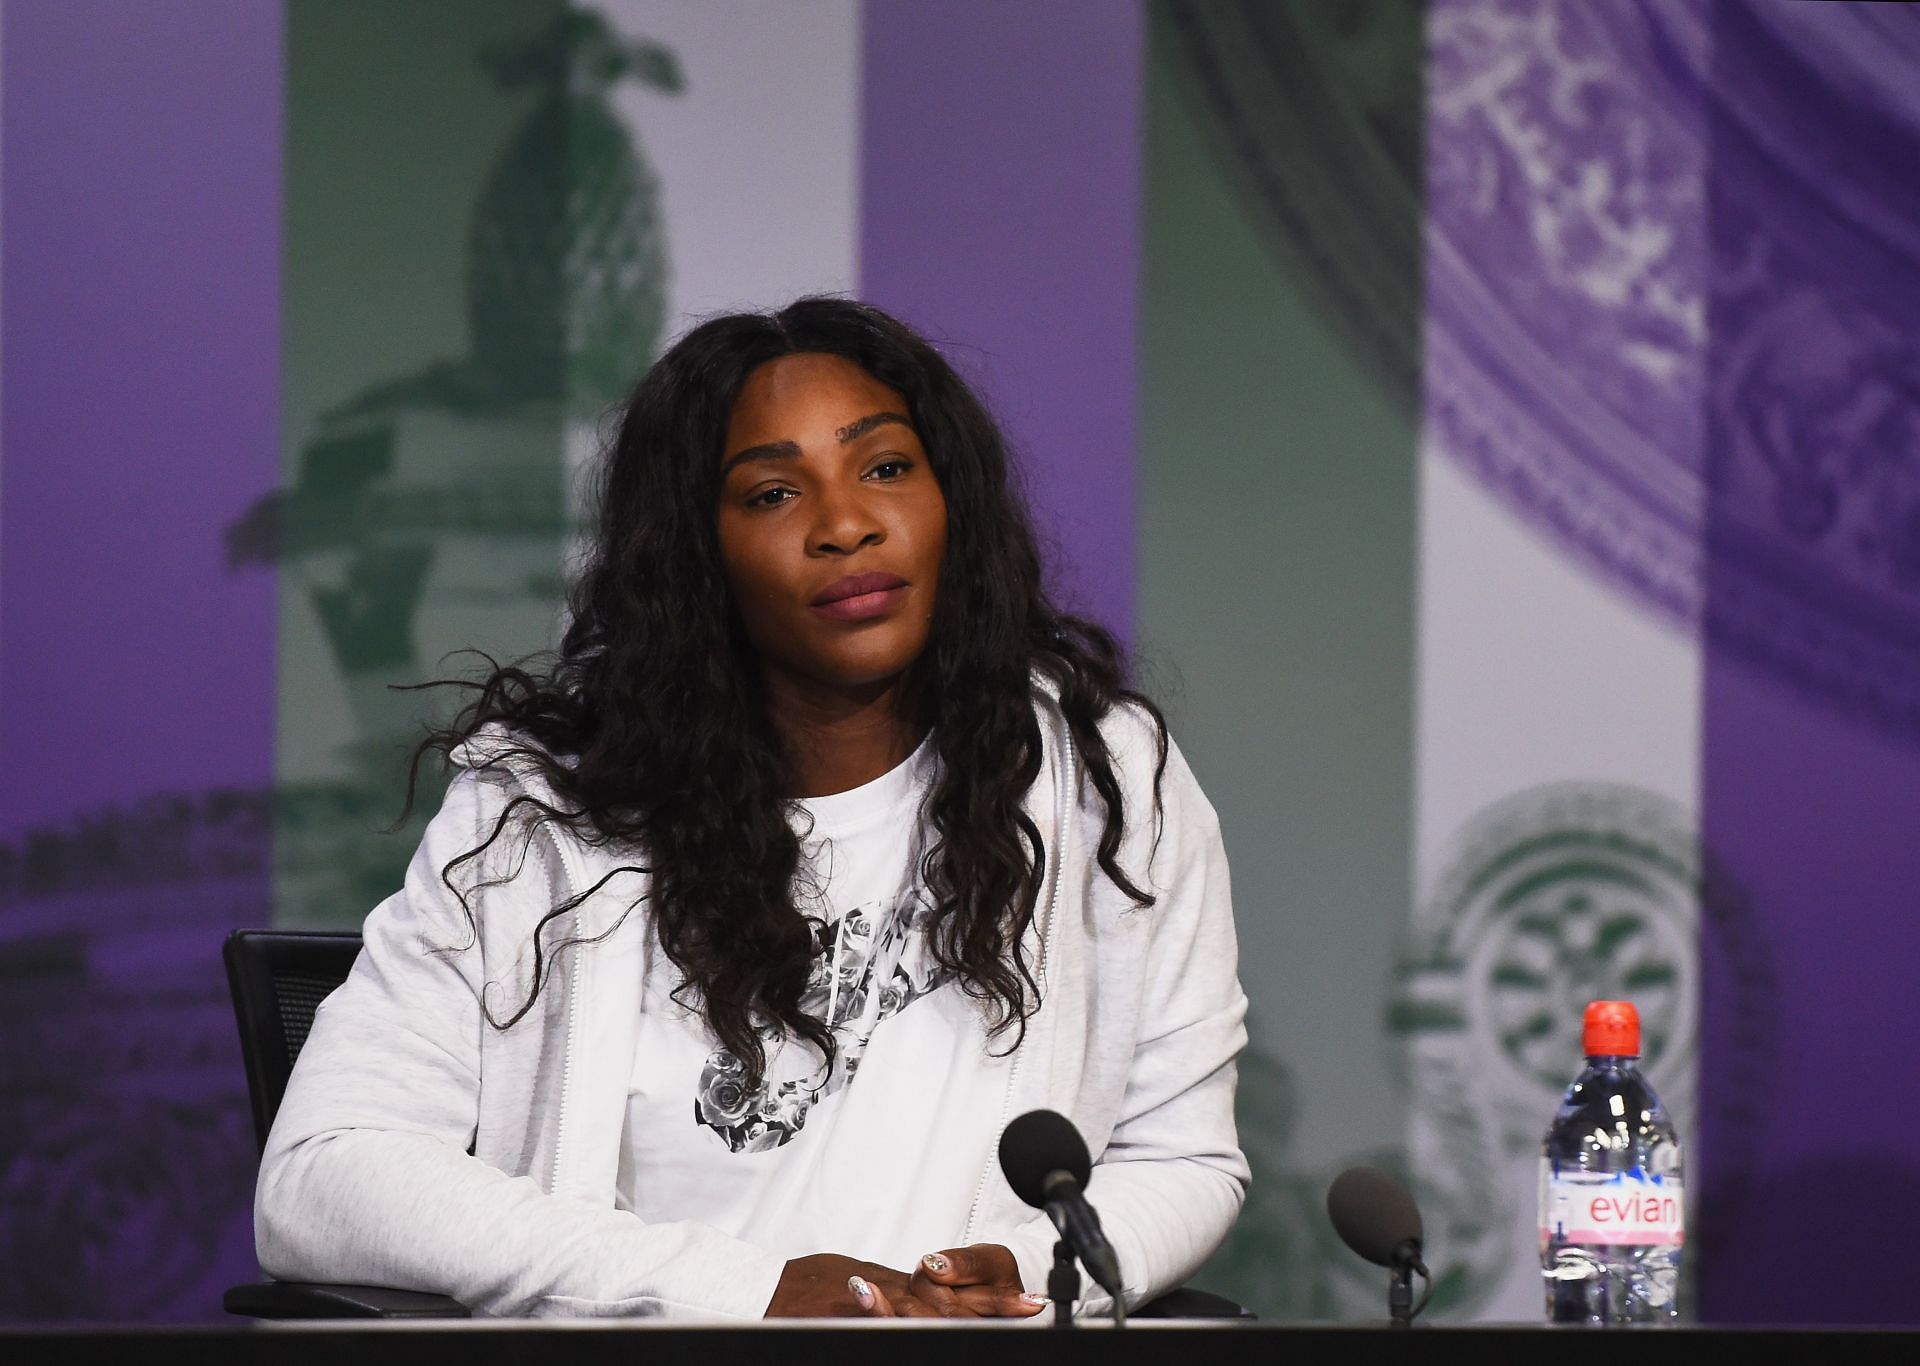 Serena Williams' investment firm benefits vastly from the champion mentality that comes with her